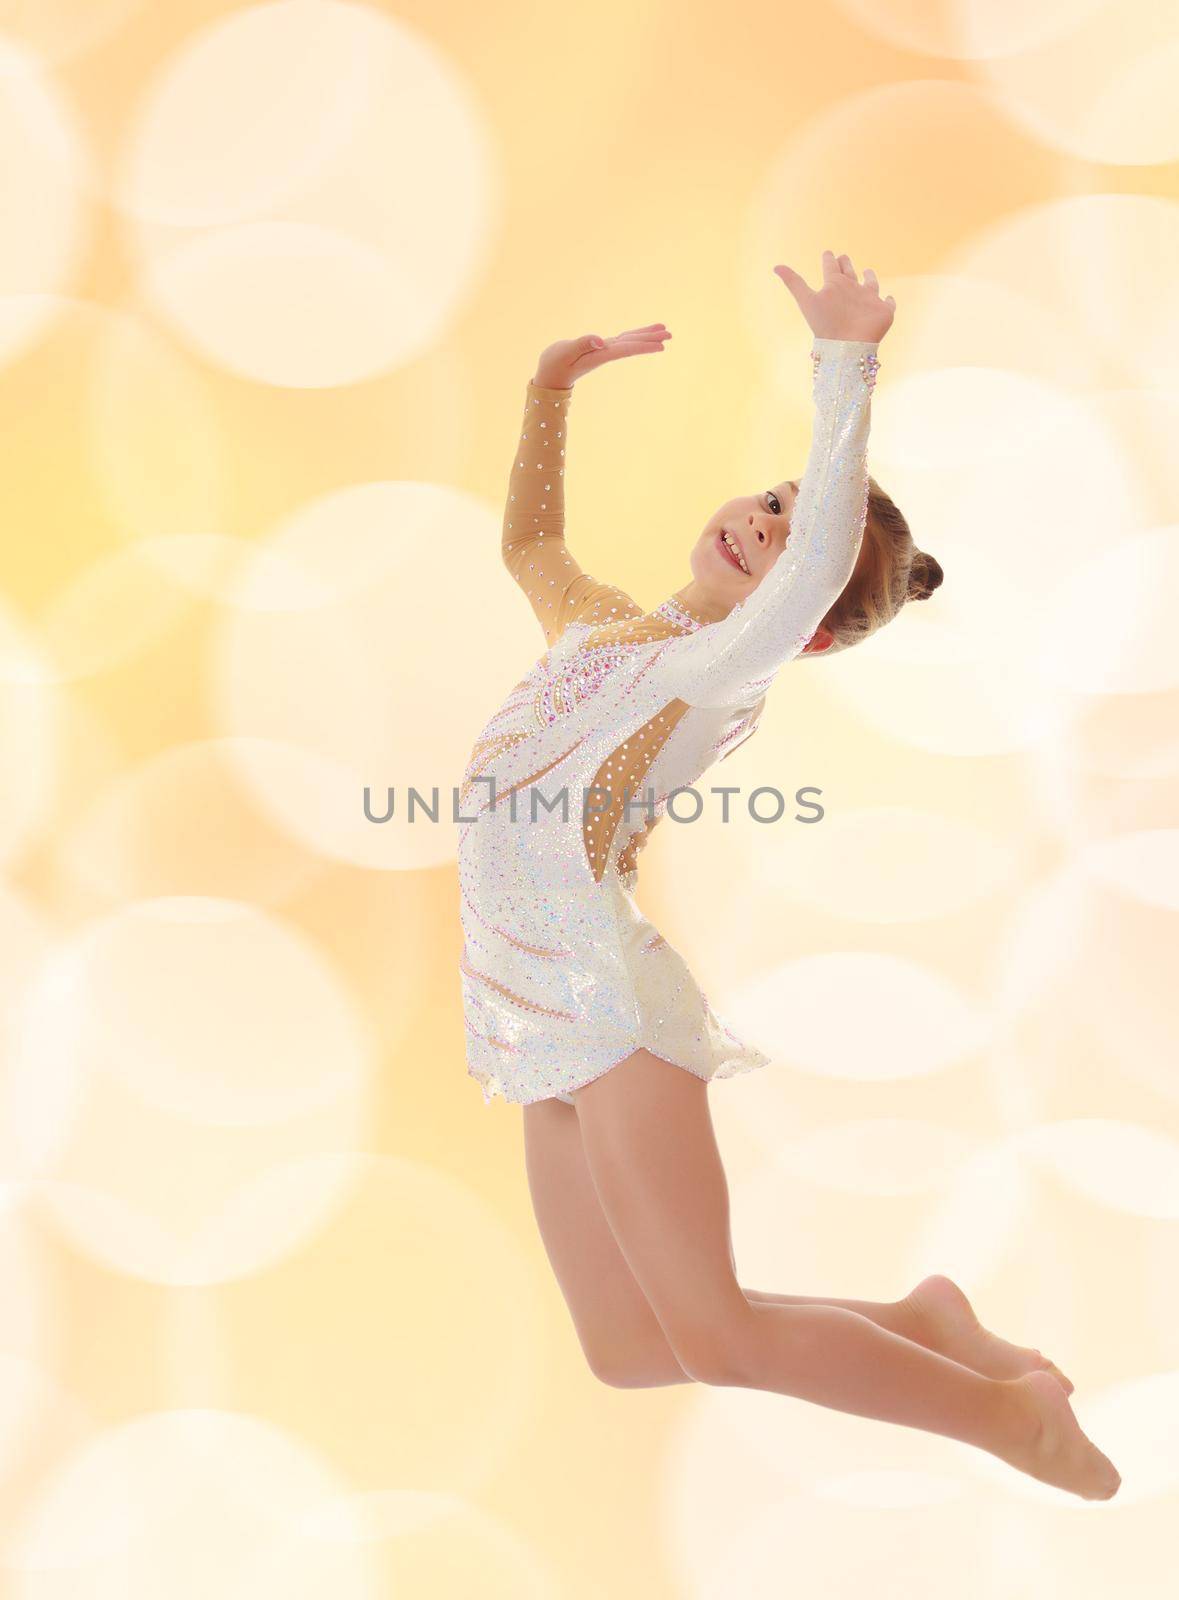 Beautiful little girl gymnast dressed in sports swimsuit, jumps high.On blurred brown background with white Christmas snowflakes.